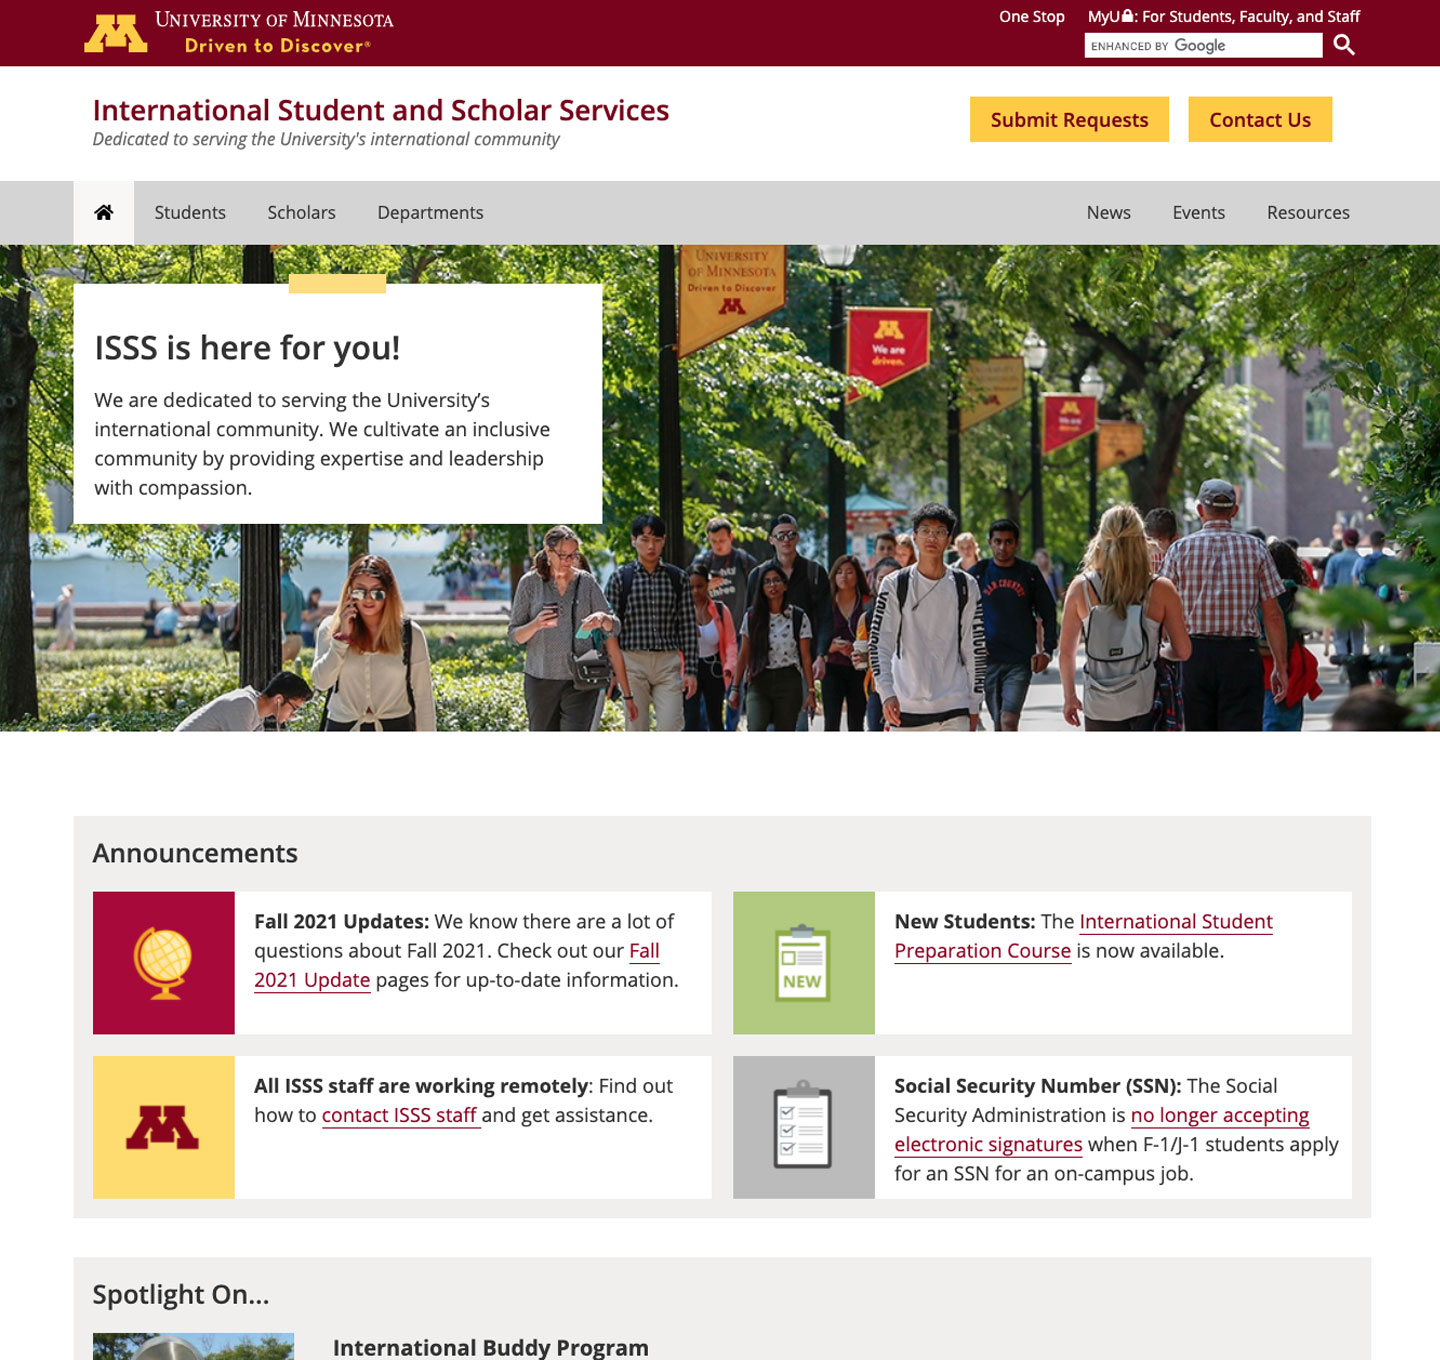 International Student and Scholar Services website home page